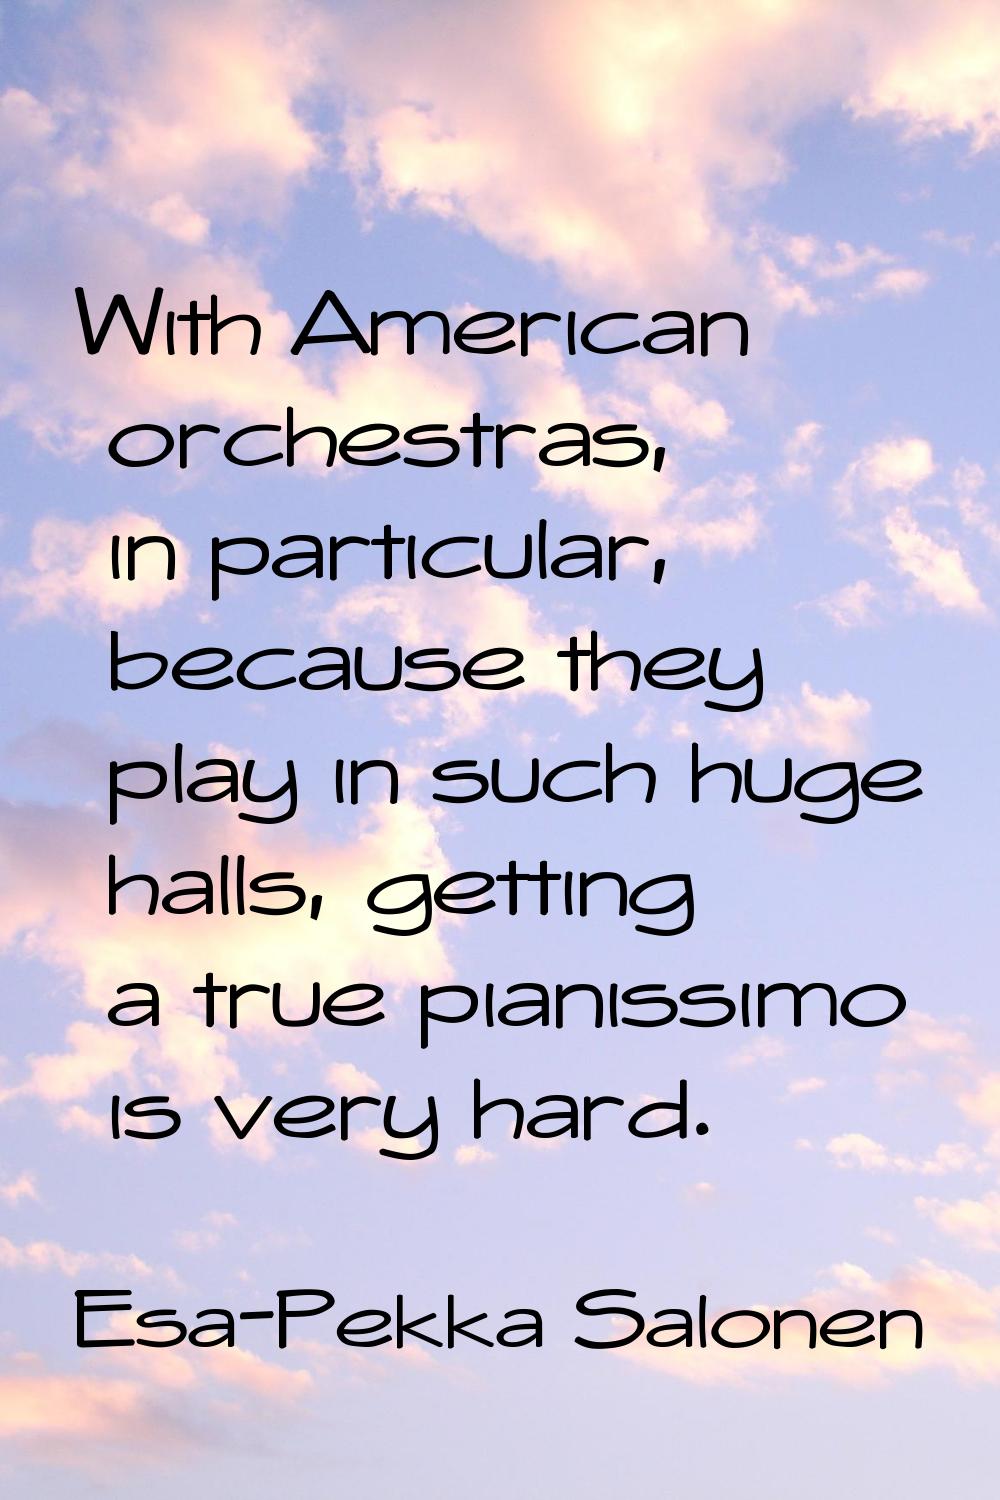 With American orchestras, in particular, because they play in such huge halls, getting a true piani